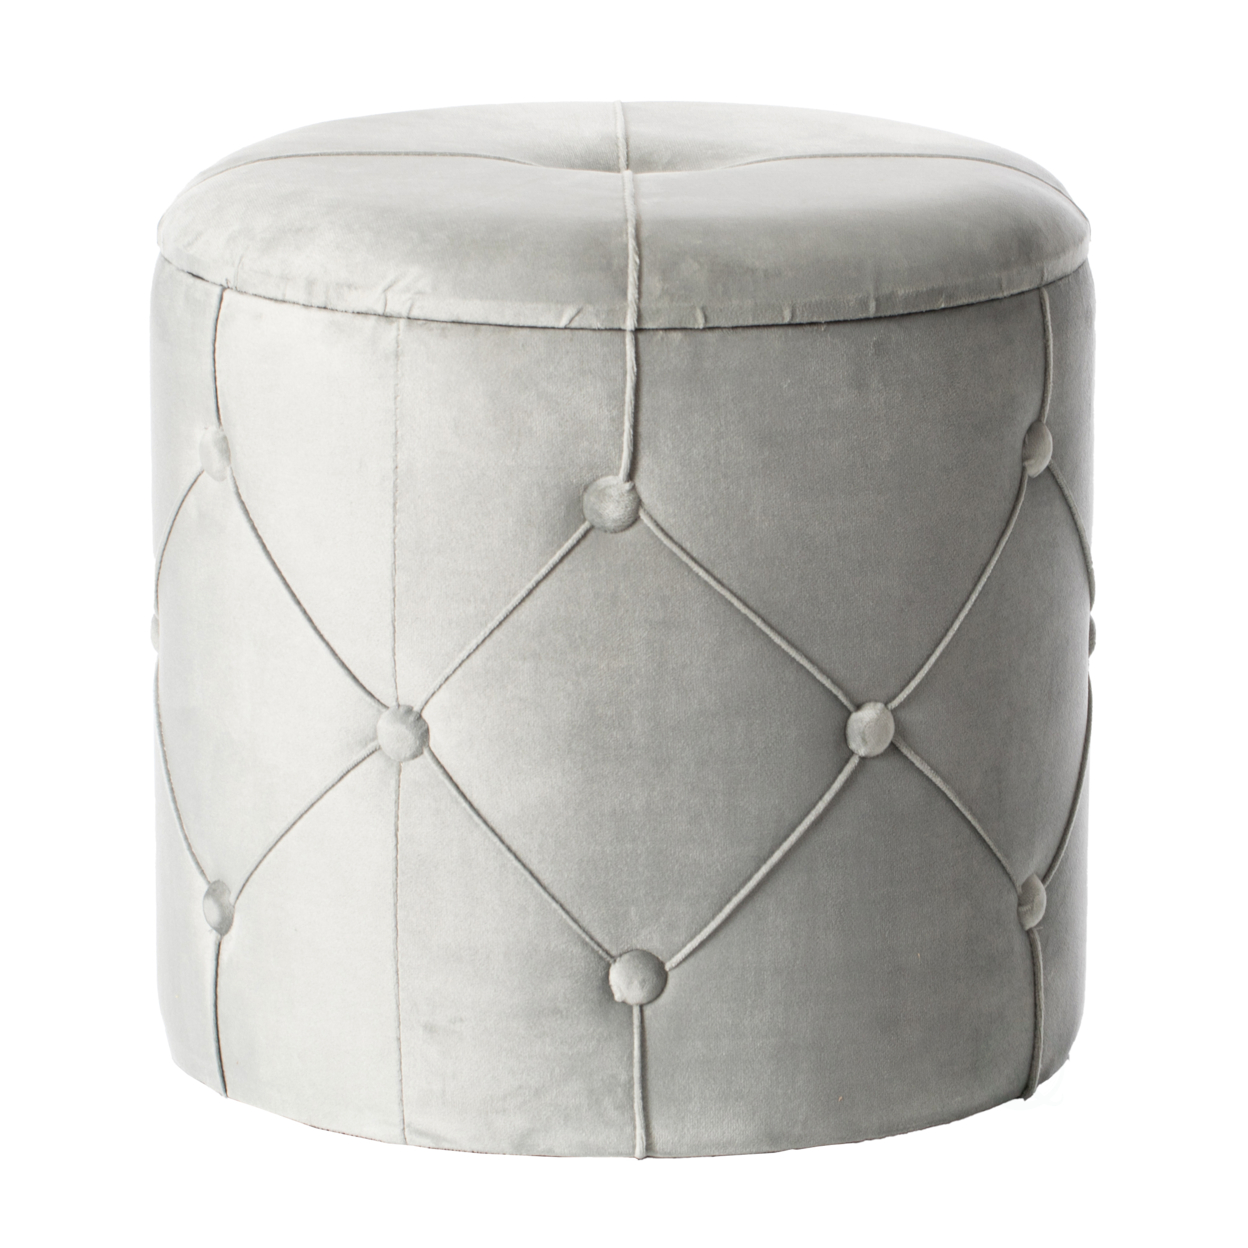 Round Tufted Velvet Wood Storage Ottoman Stool With Lid - Gray